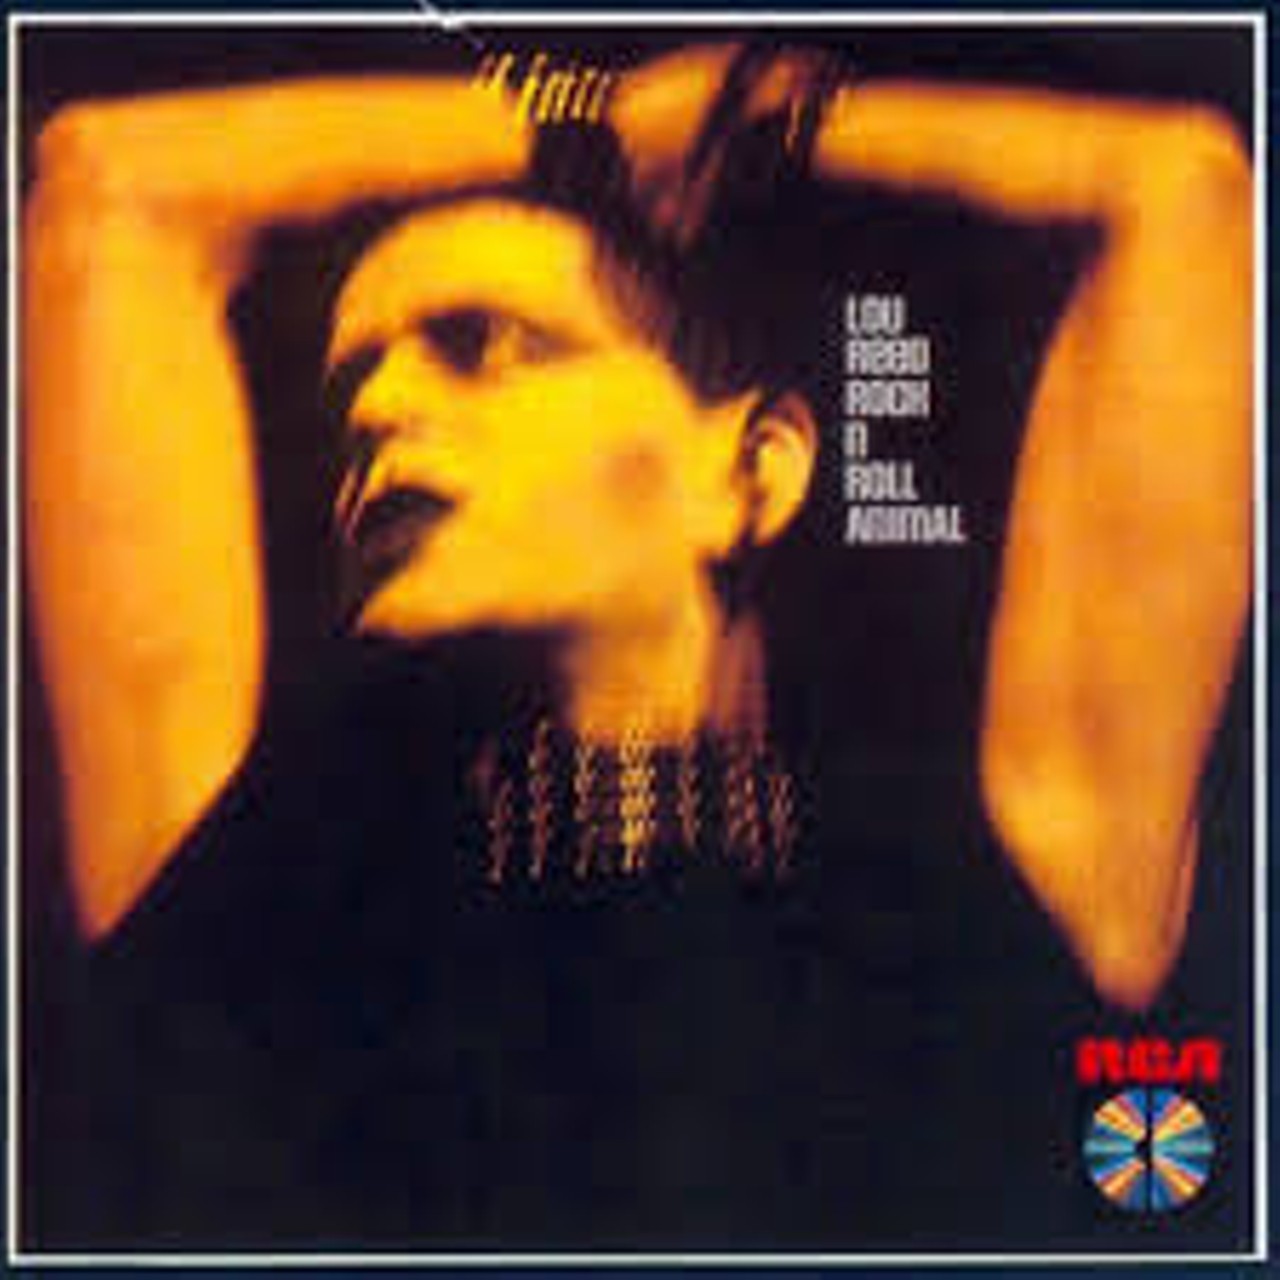 Rock ’n’ Roll Animal
Wagner also played with Reed on this excellent live album. On his Facebook page Wagner said, “I just found out that Lou Reed has died. It brings me sadness, and nostalgia for a time spent playing his music and taking it to the large venues of Europe and America. Lou Reed was a brilliant songwriter and I enjoyed helping him bring his songs to a larger rock and roll audience. The rock ’n’ roll animal has passed, but in his recordings, you will find his true contribution to the continuum that is American music.”